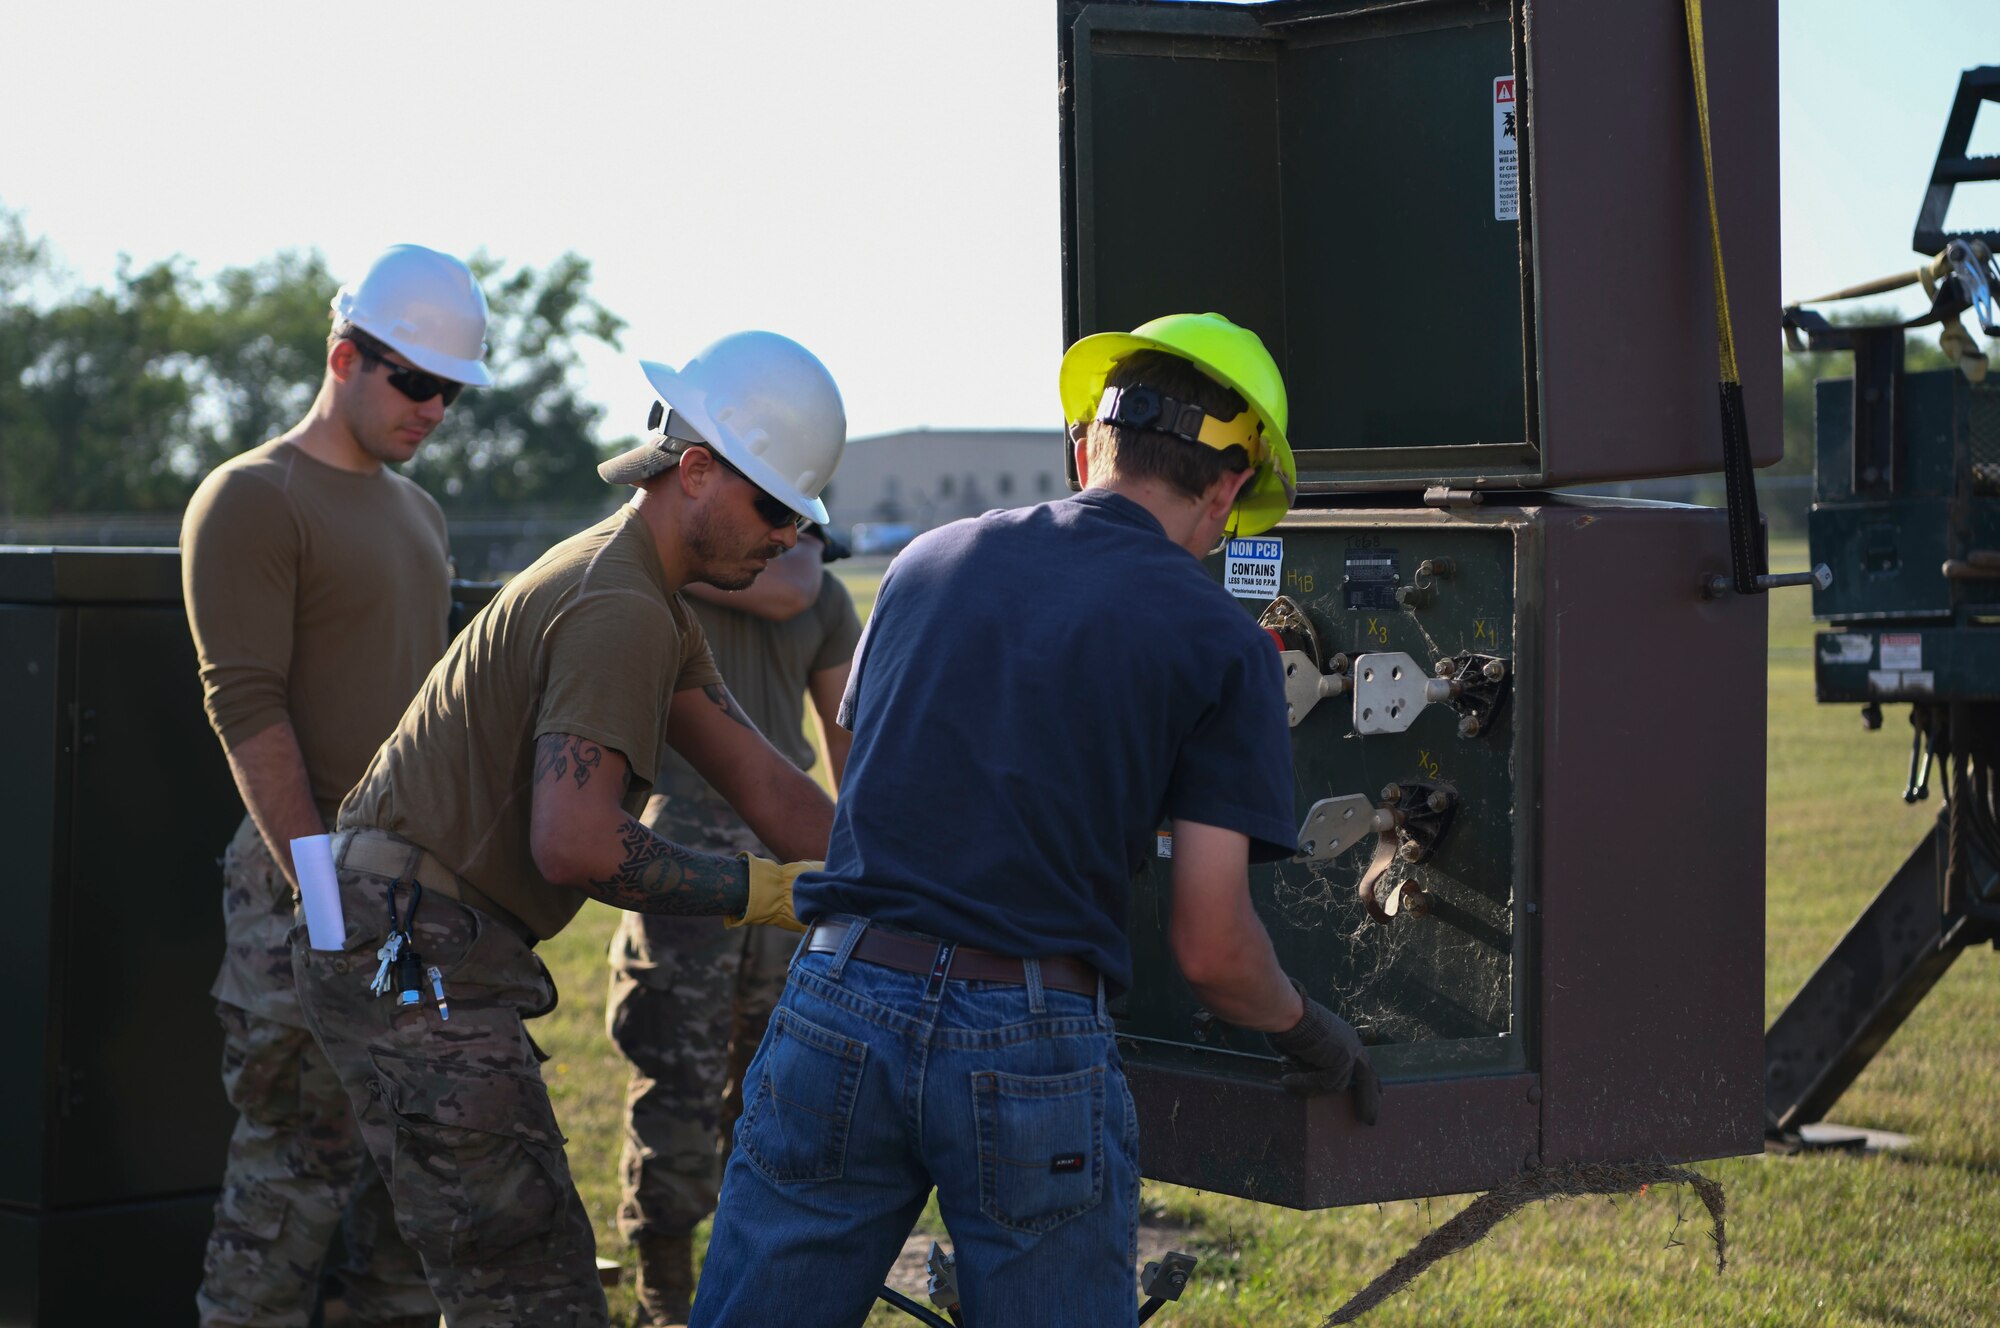 Airmen from the 319th Civil Engineer Squadron and Nodak Electric Cooperative contractors replace high-voltage electrical wiring Aug. 23, 2022, on Grand Forks Air Force Base, North Dakota. The installation project allowed the existing mission infrastructure to be upgraded and created training opportunities for the 319th CES airmen. (U.S. Air Force photo by Senior Airman Roxanne A. Belovarac)